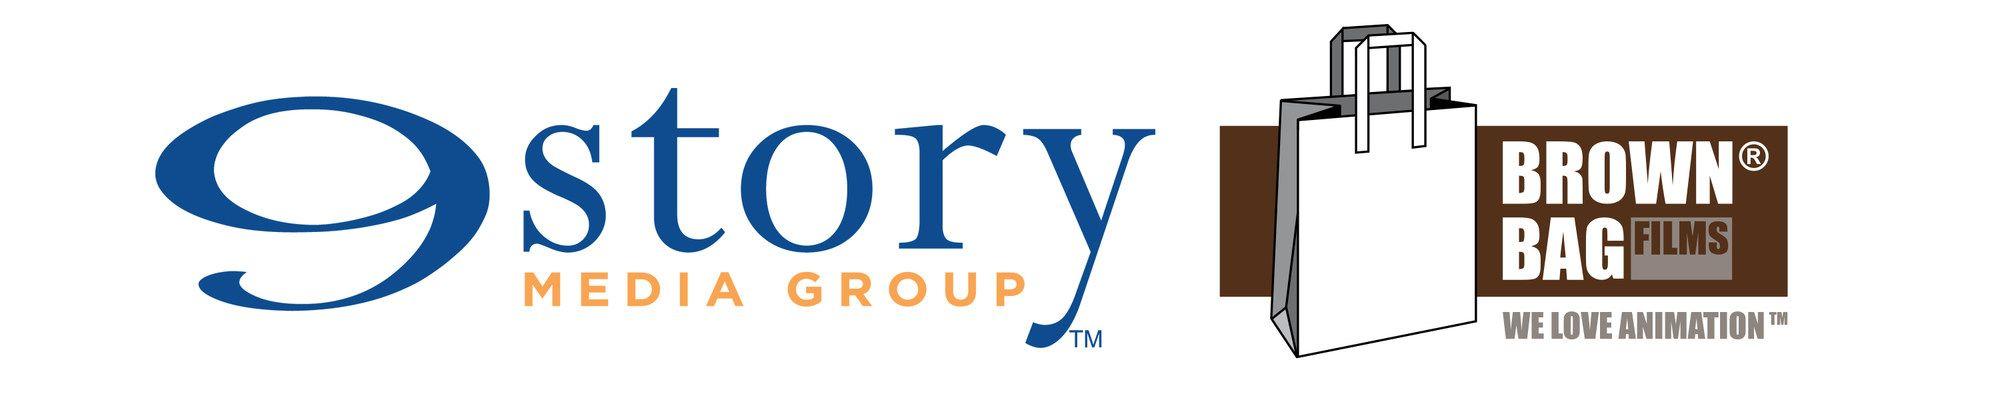 9 Story Entertainment Logo - Story Media Group Acquires Award Winning Animation Studio Brown